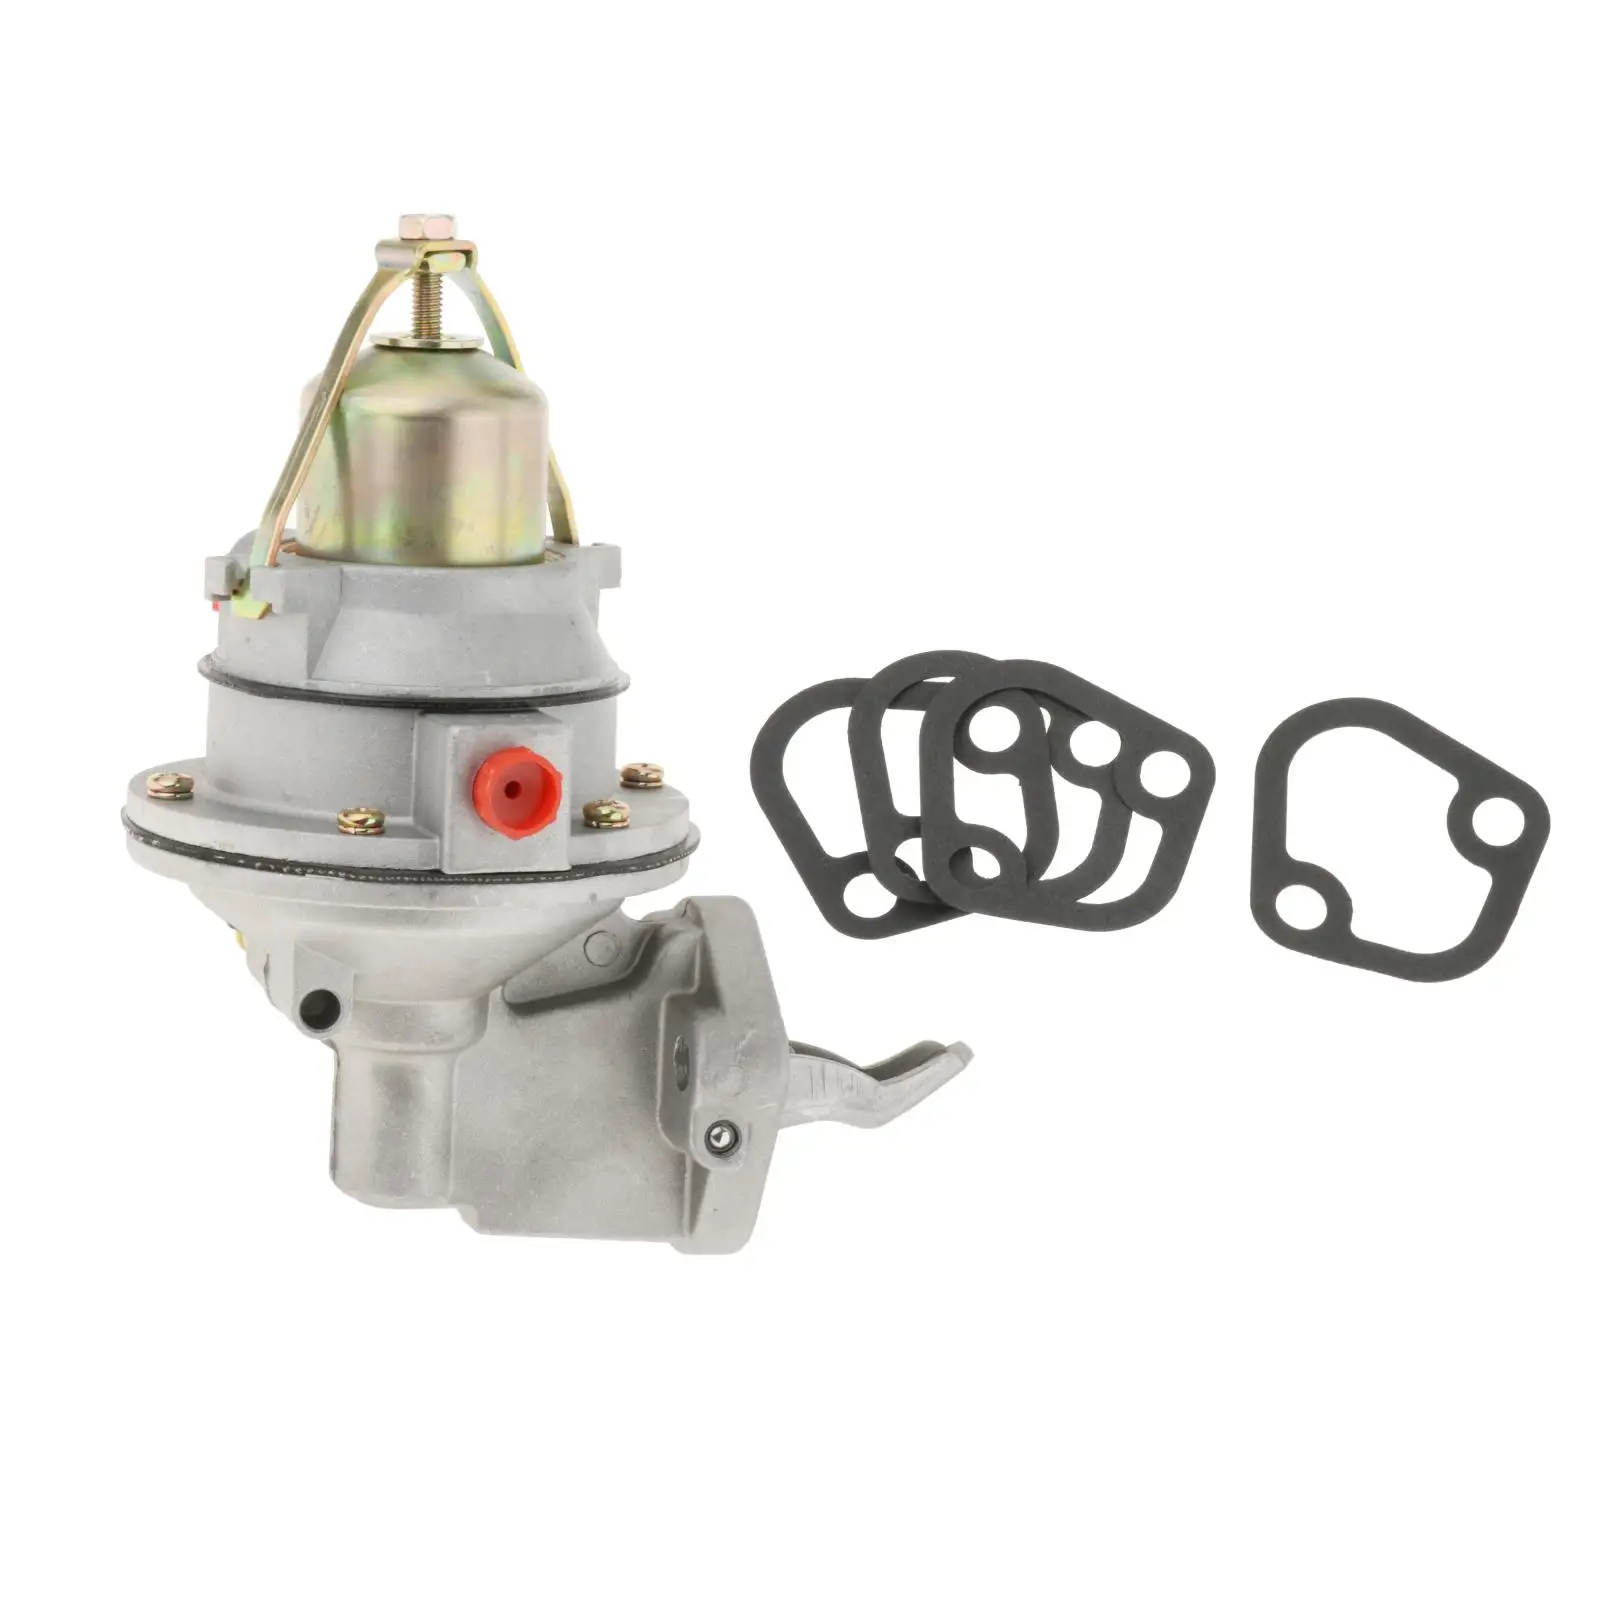 3854858 Fuel Pump Kit Engine Parts 18-7282 861676T09 Replace 509407 with Install Kit Assembly for Mercruiser 470-1